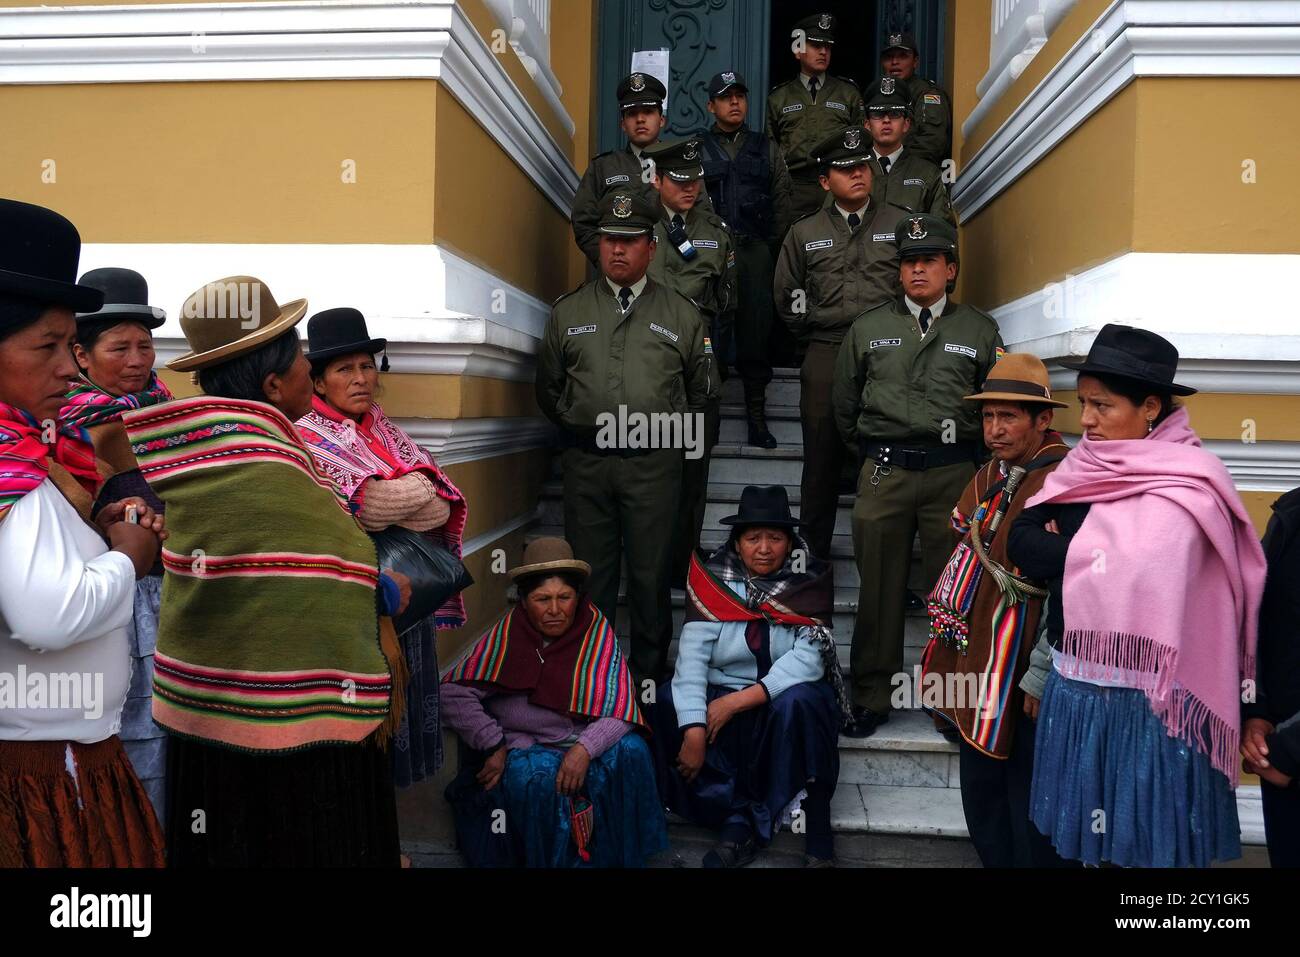 Members of Bolivia's CONAMAQ (National Council of Ayllus and Markas of Qullasuyu), a confederation to politically represent certain indigenous communities, sit outside the congress building as they keep vigil for their leaders who have been on a hunger strike for the last four days, in La Paz, October 7, 2013. The CONAMAQ are protesting against the results of the last census, which caused the geographical region they represent to lose congressional seats for the next legislative elections in 2014, according to local media. The hunger strikers called off their protest on Monday, when it became  Stock Photo